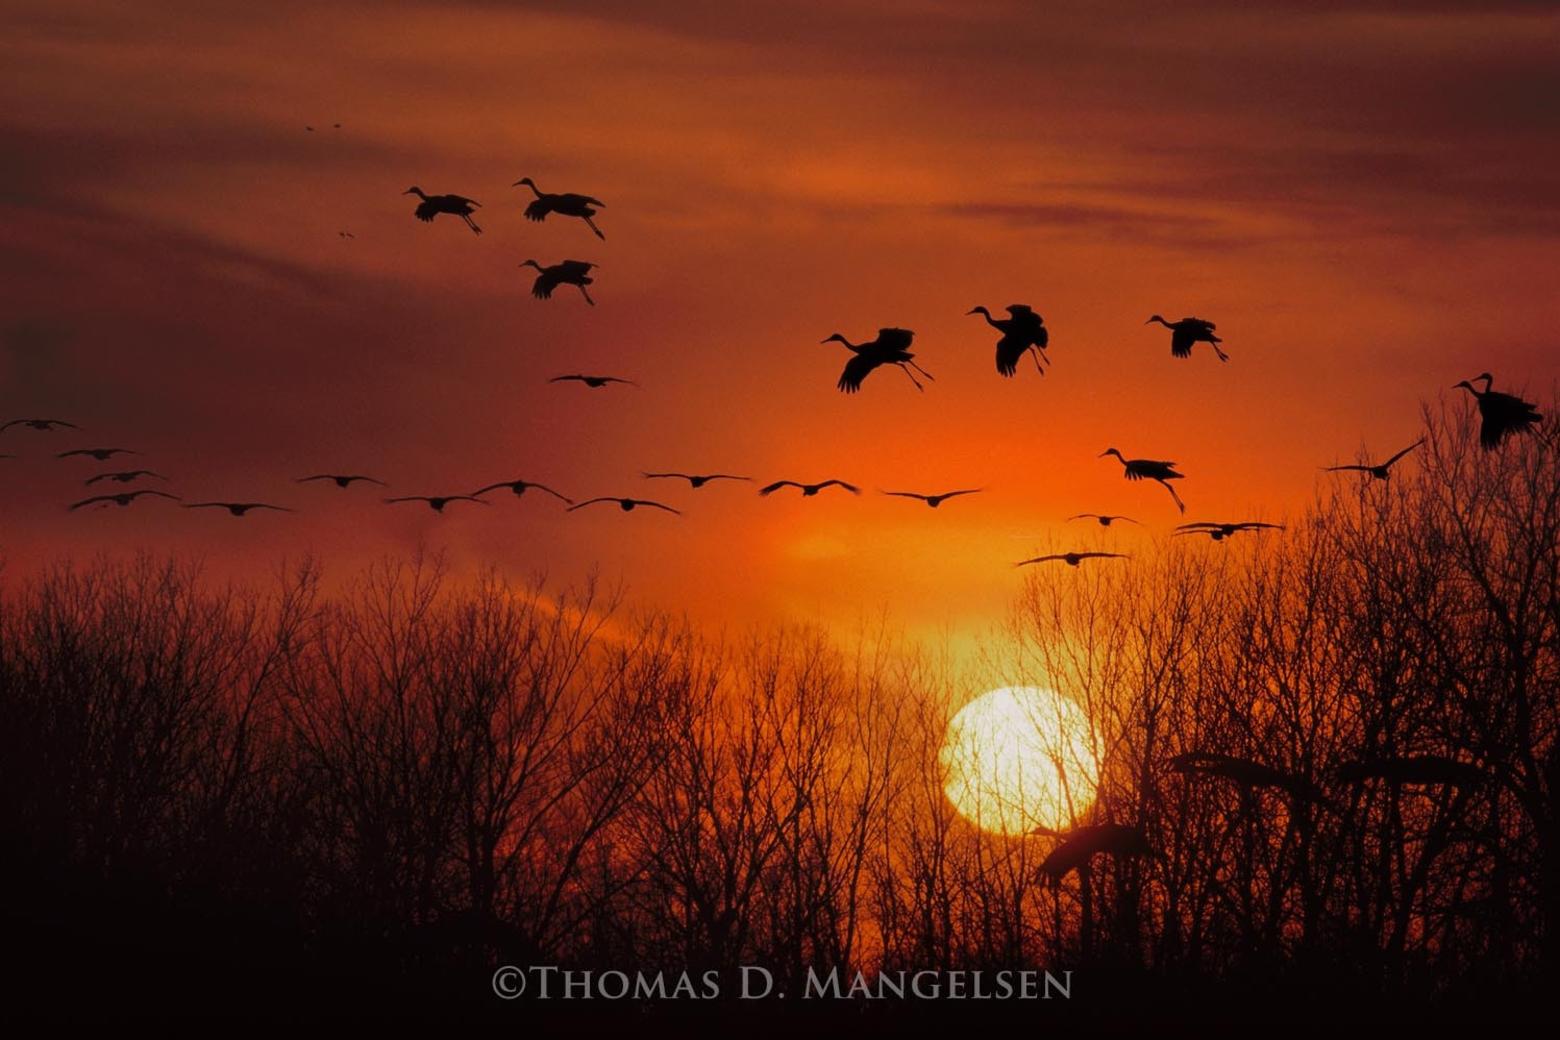 "Sandhill Cranes" by Thomas D. Mangelsen. To see more of his work go to mangelsen.com